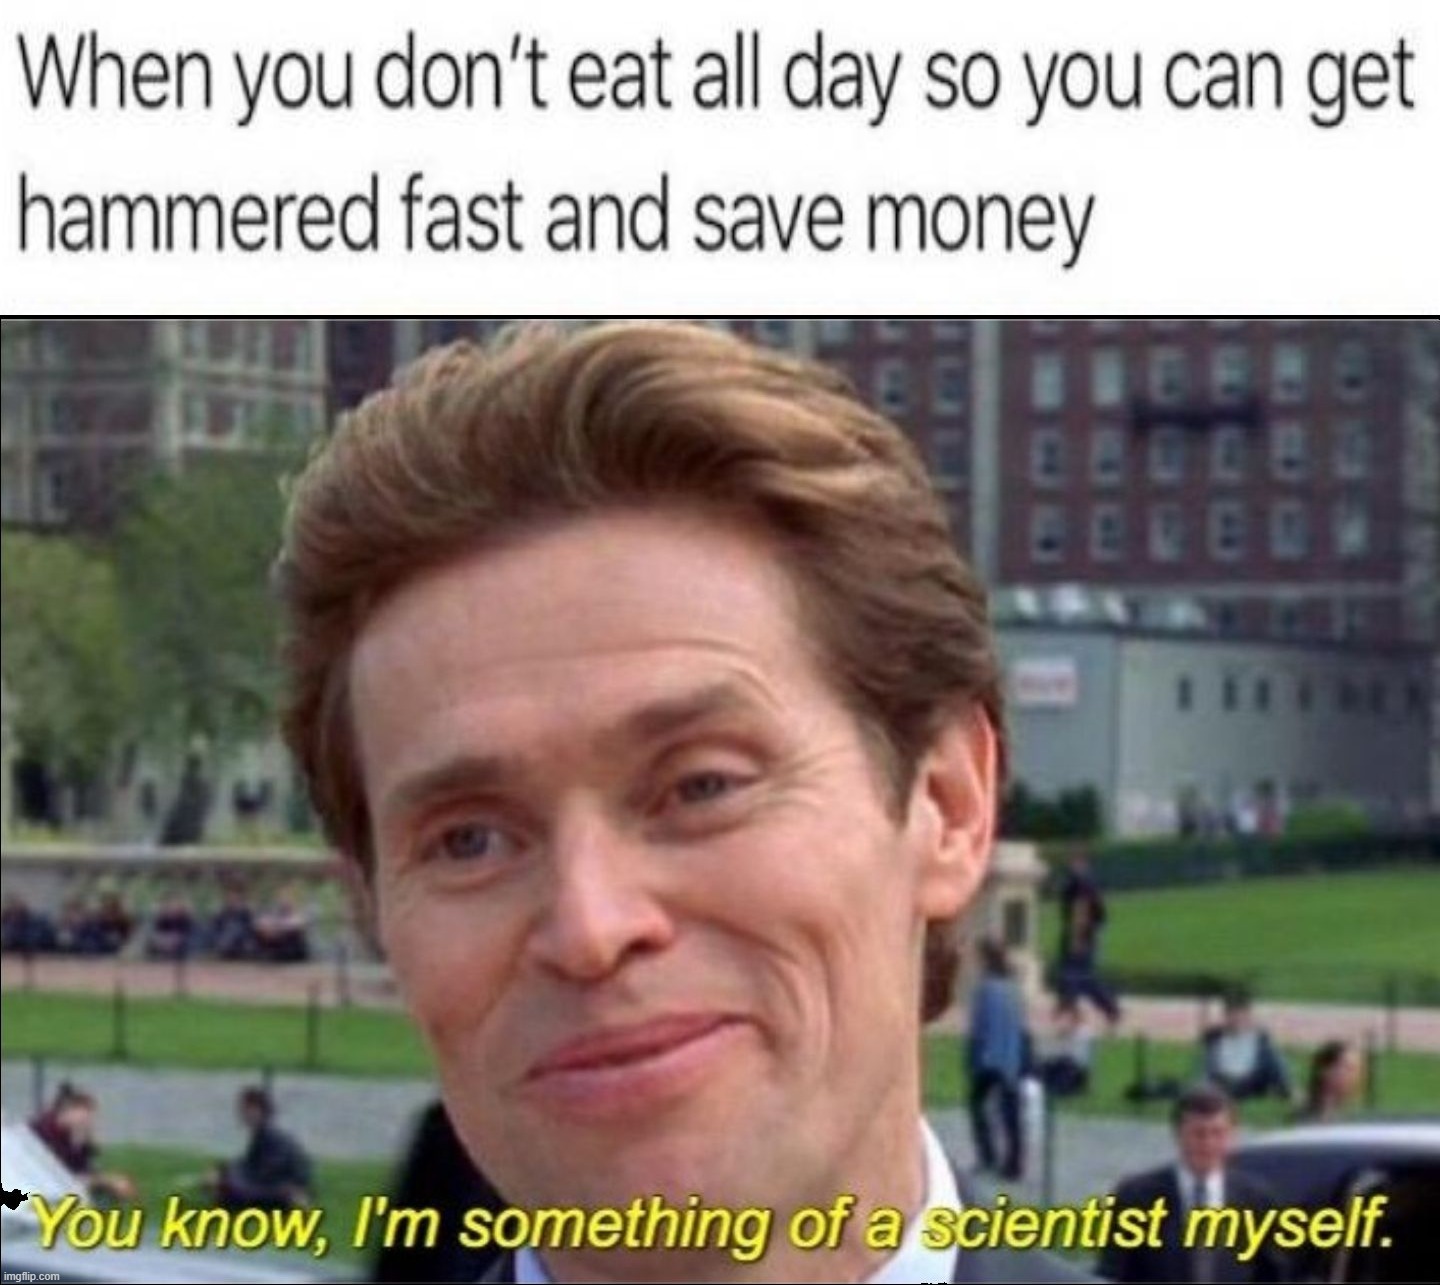 You know, I'm something of a scientist myself | image tagged in you know i'm something of a scientist myself | made w/ Imgflip meme maker